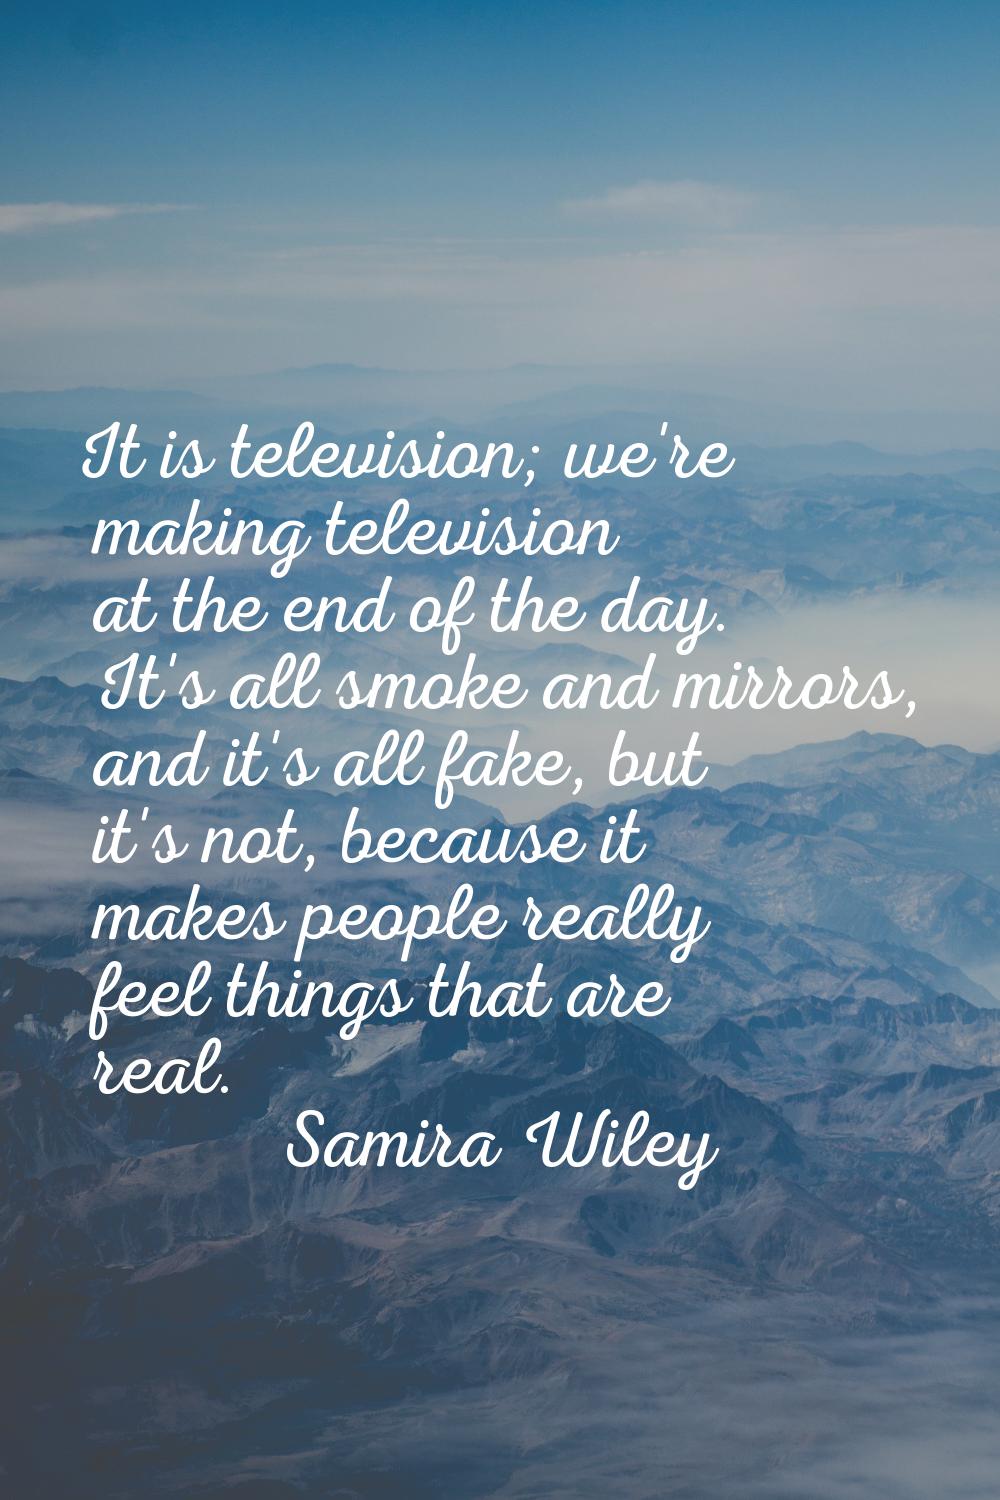 It is television; we're making television at the end of the day. It's all smoke and mirrors, and it